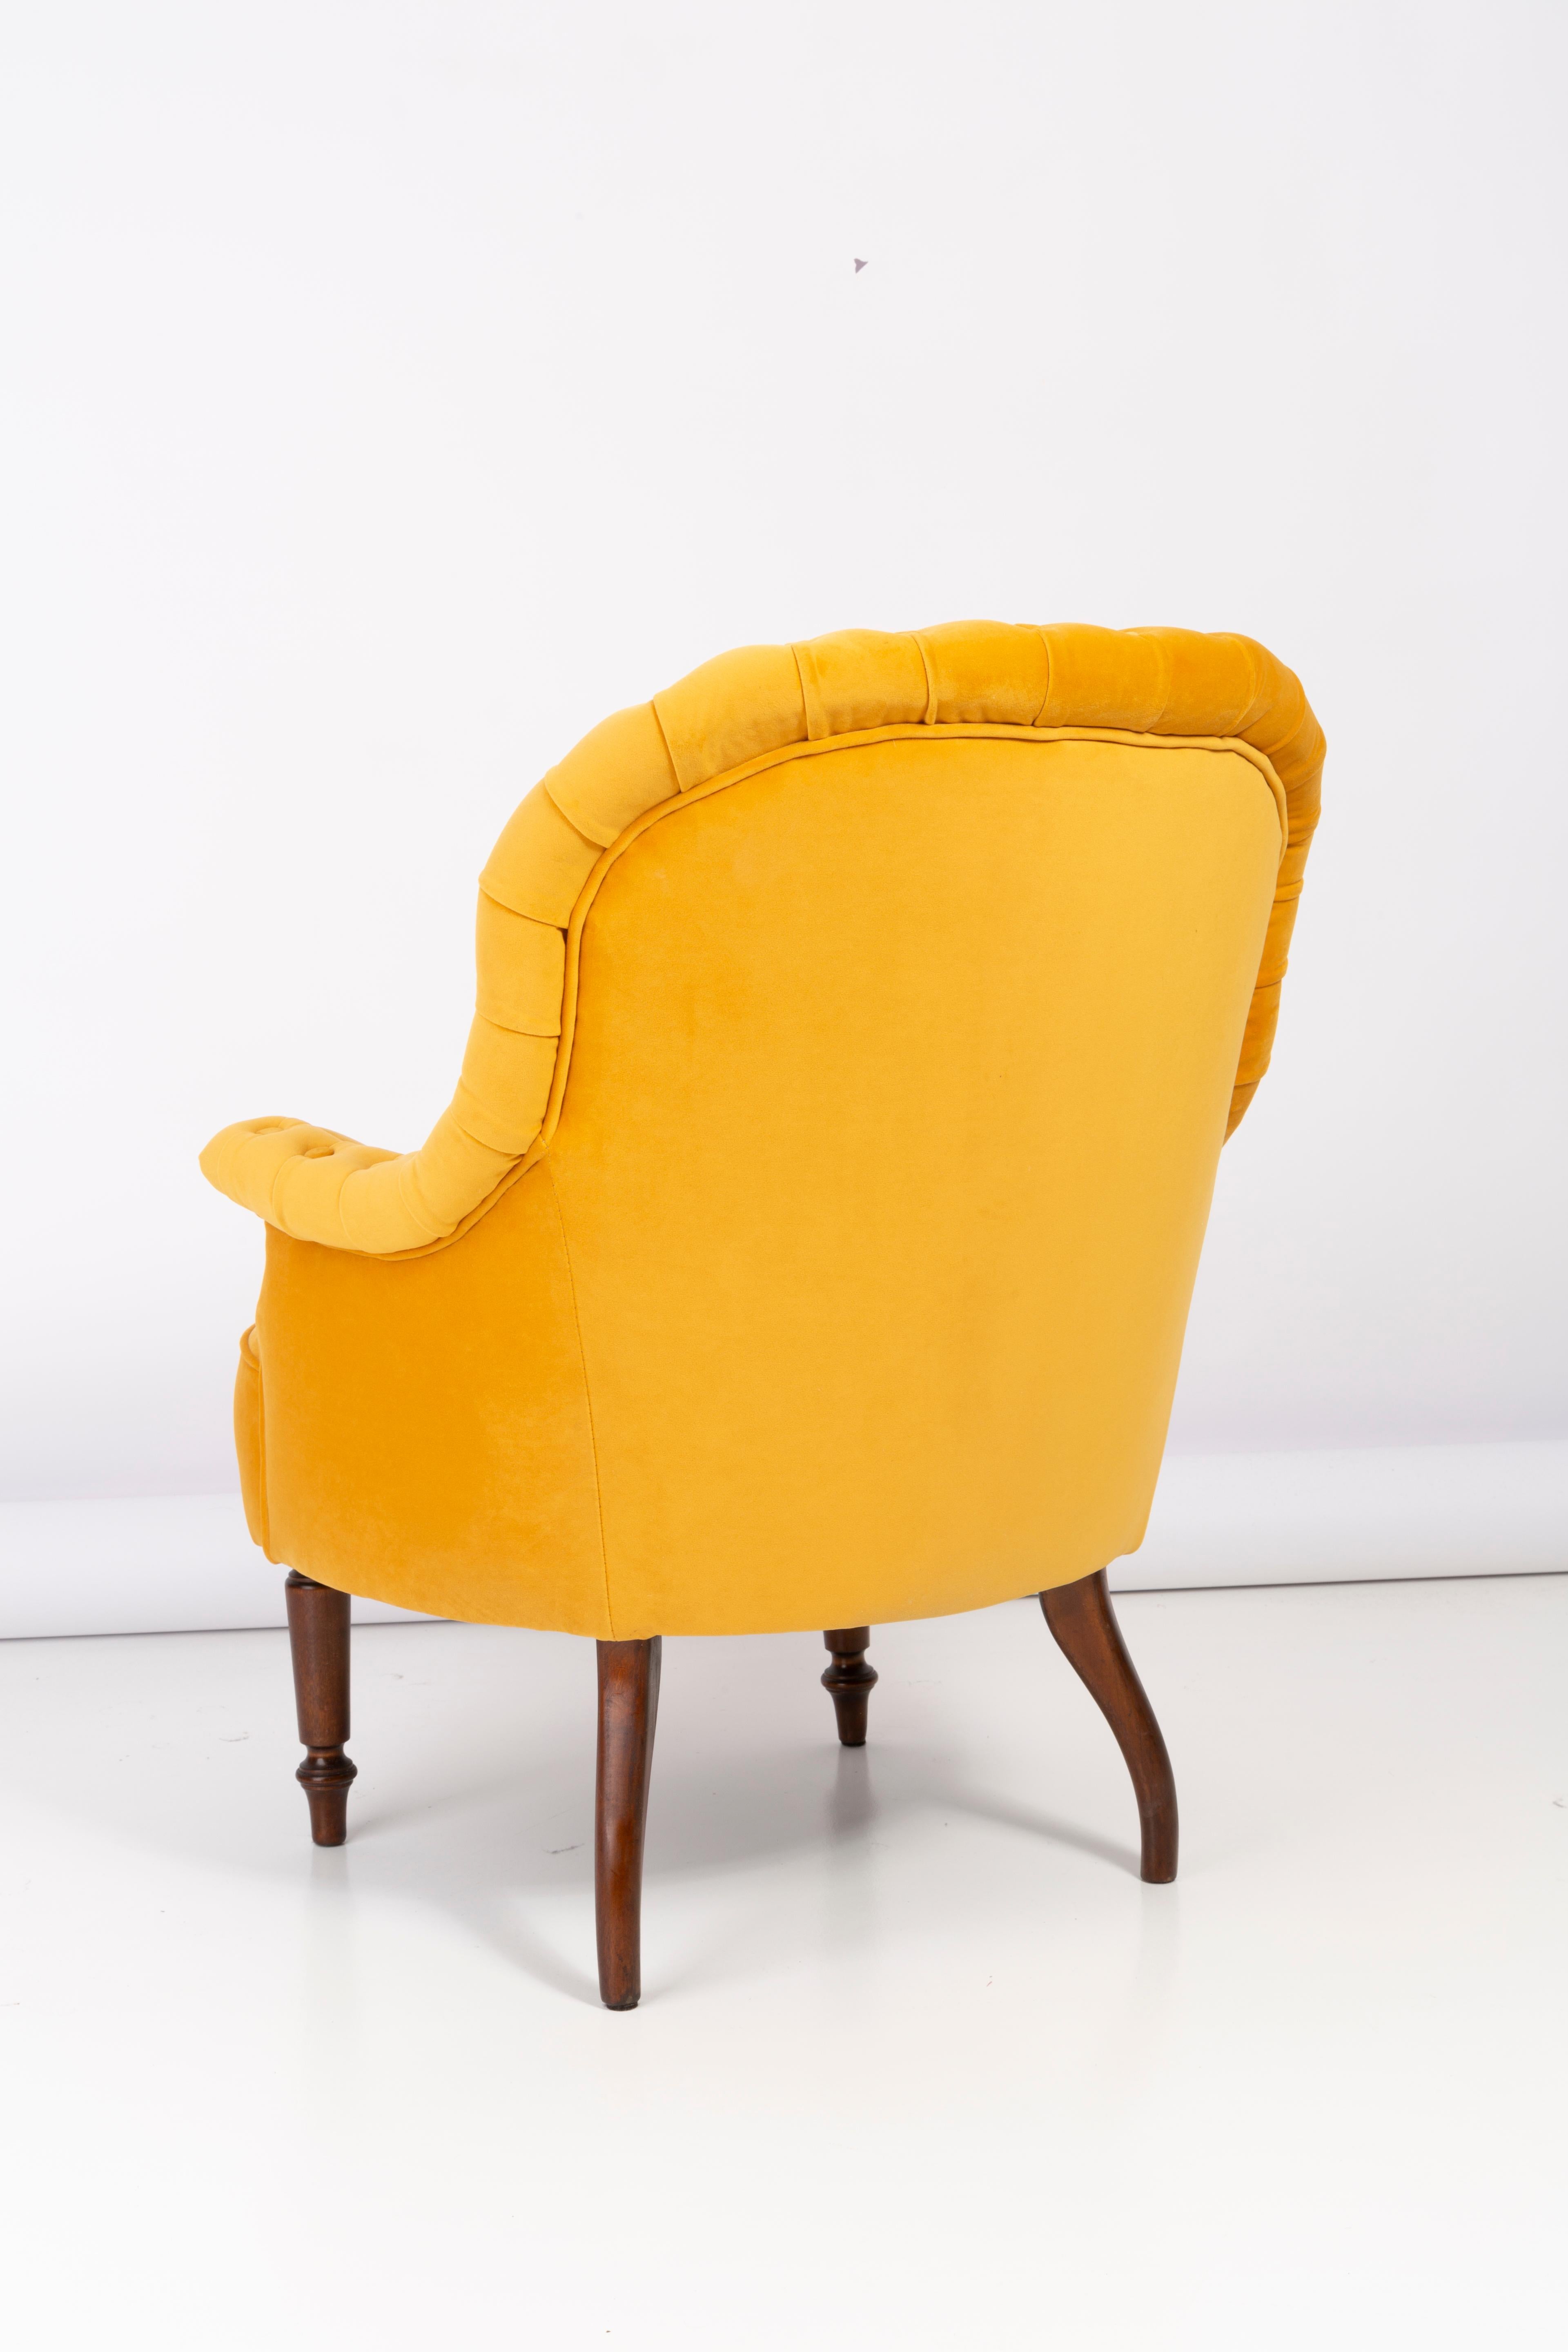 Unique Yellow Mustard Armchair, 1930s, Germany For Sale 1